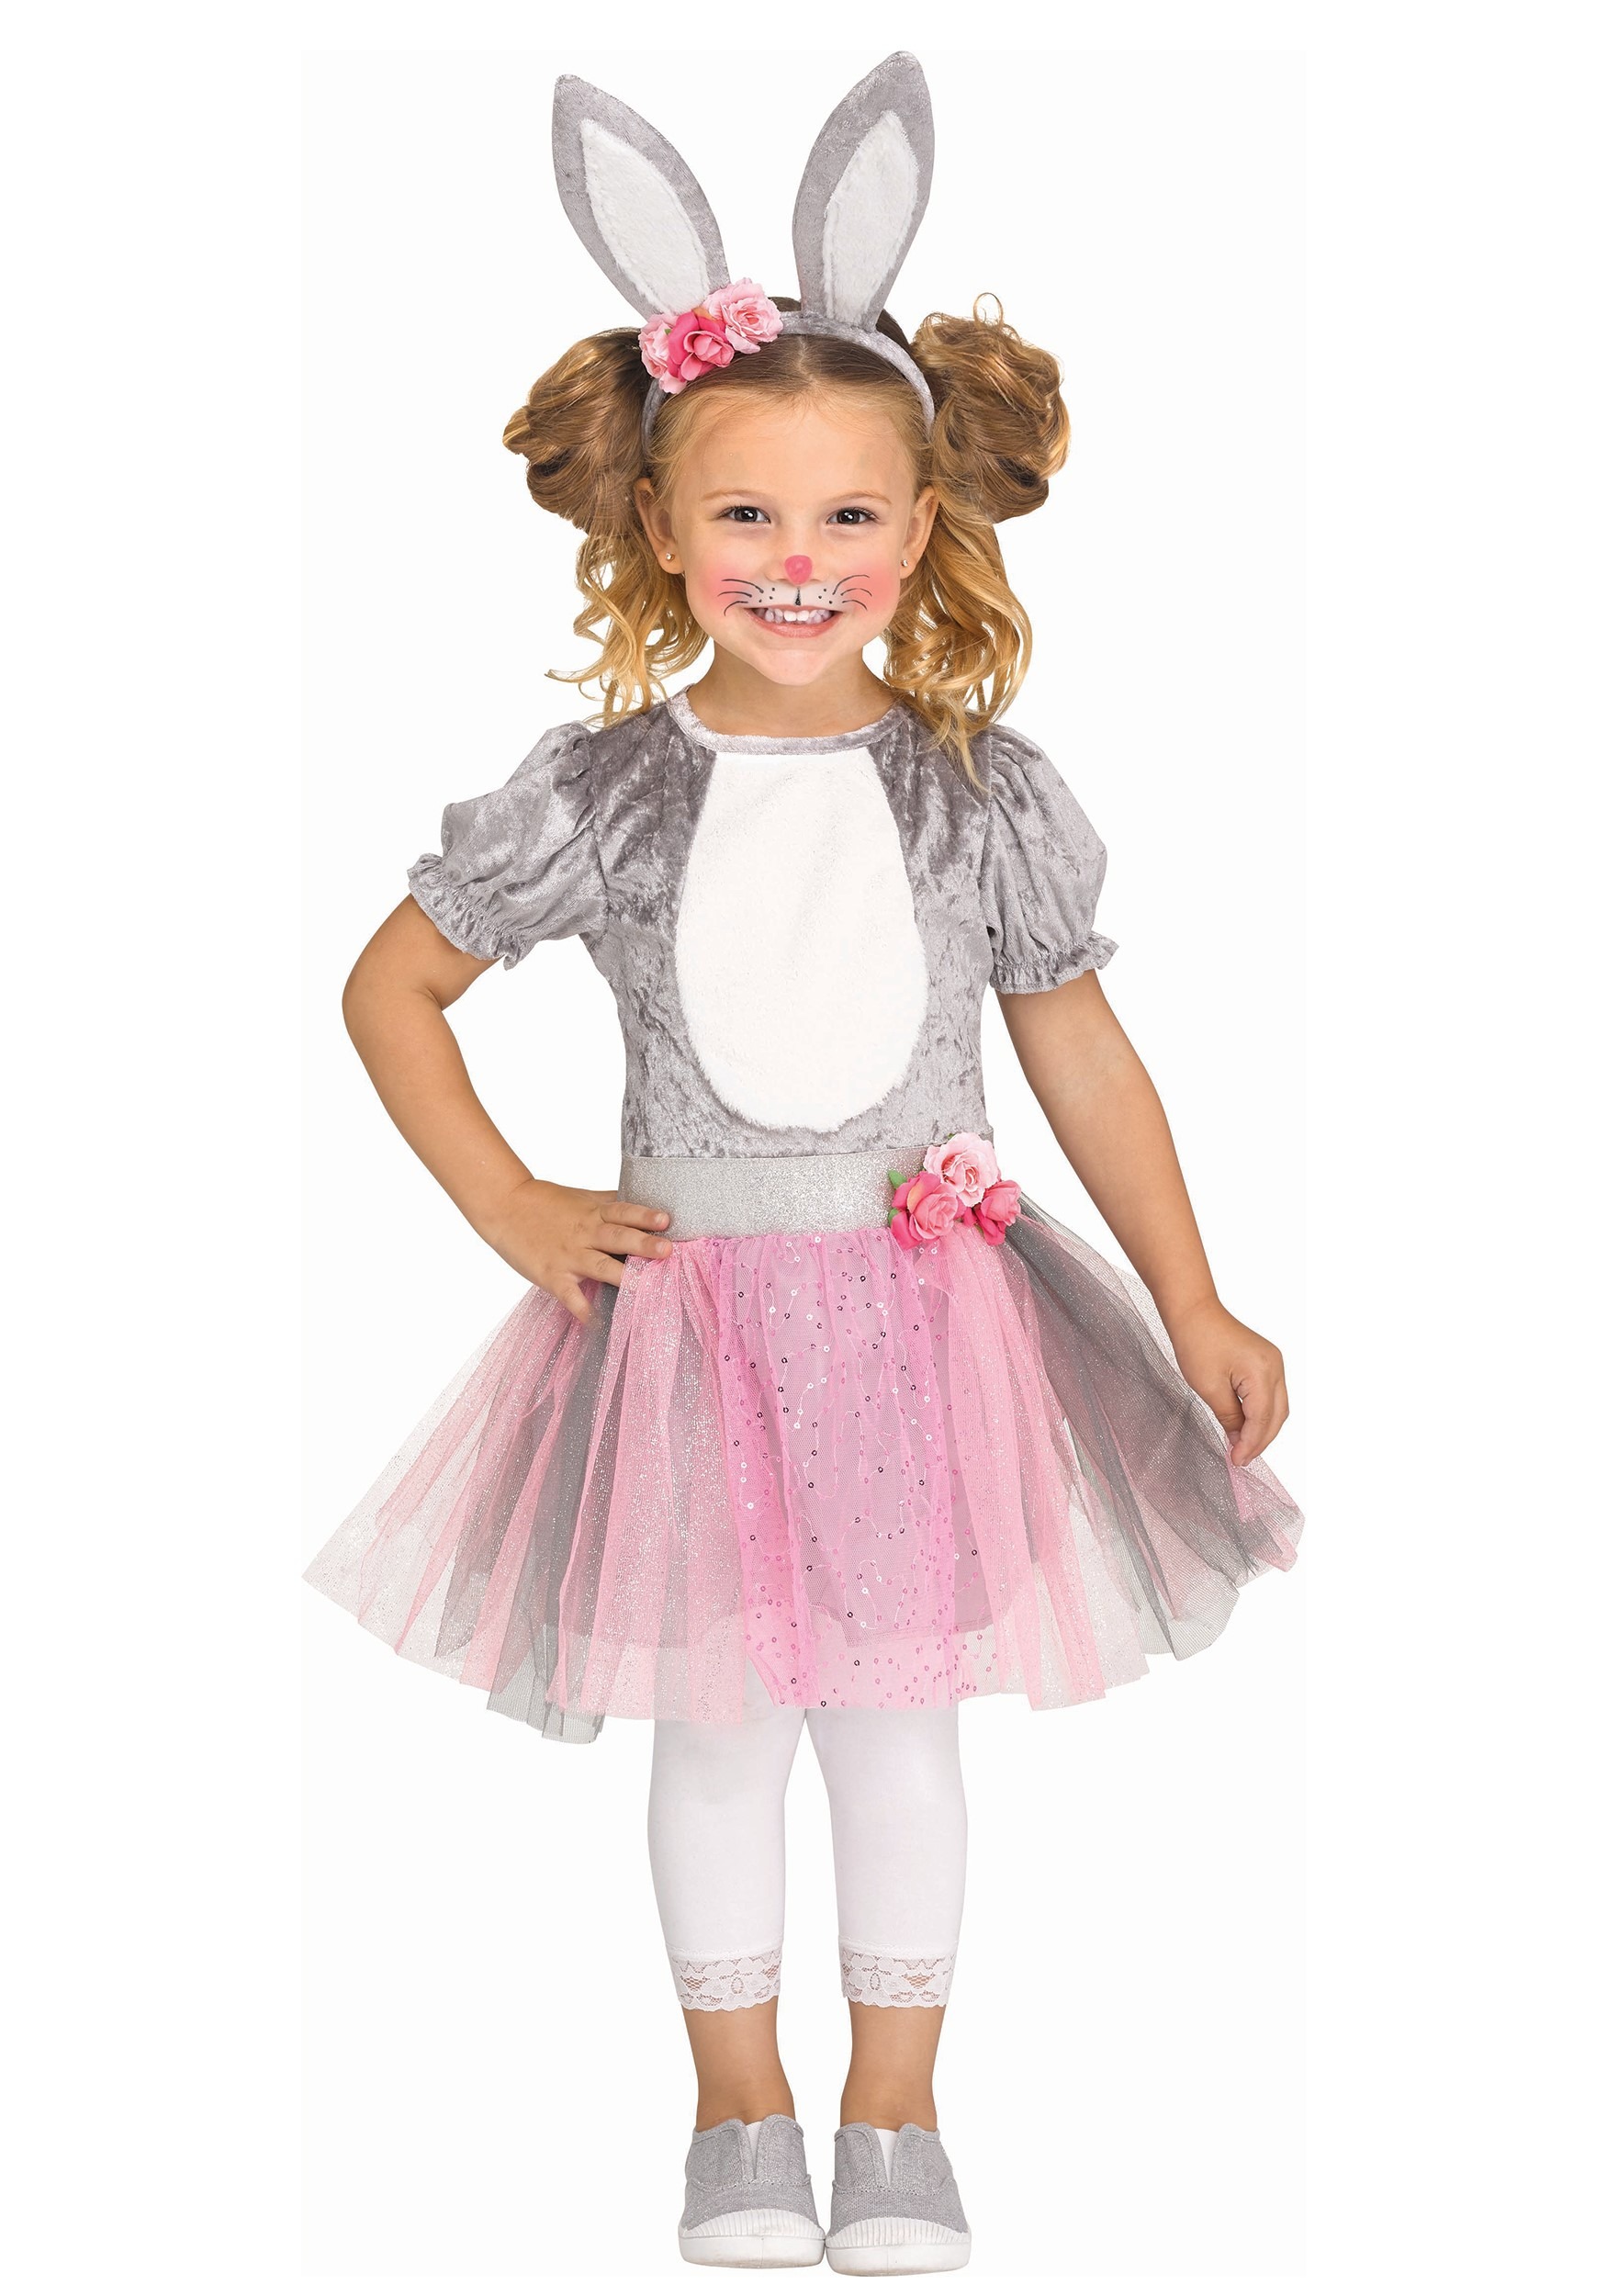 Photos - Fancy Dress Fun World Honey Bunny Costume for Toddlers Pink/Gray/White FU11331